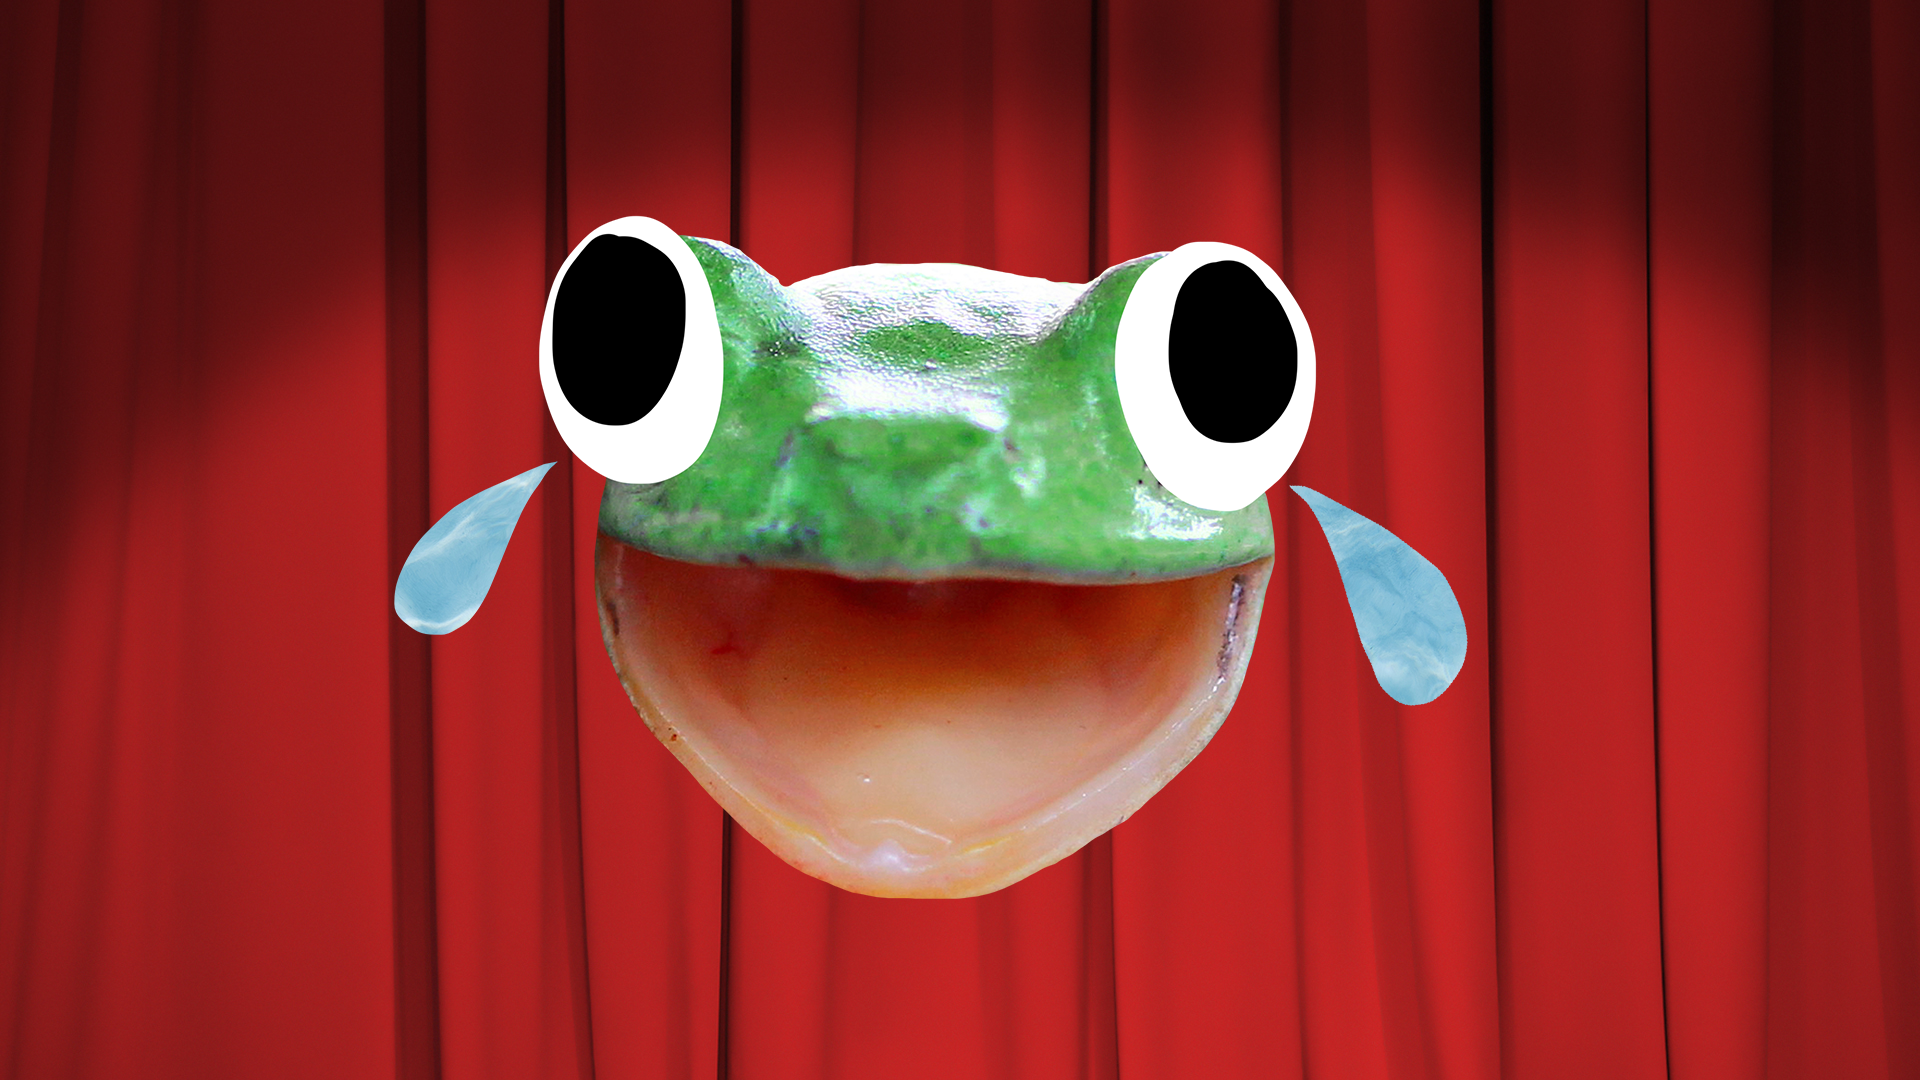 A laughing green frog